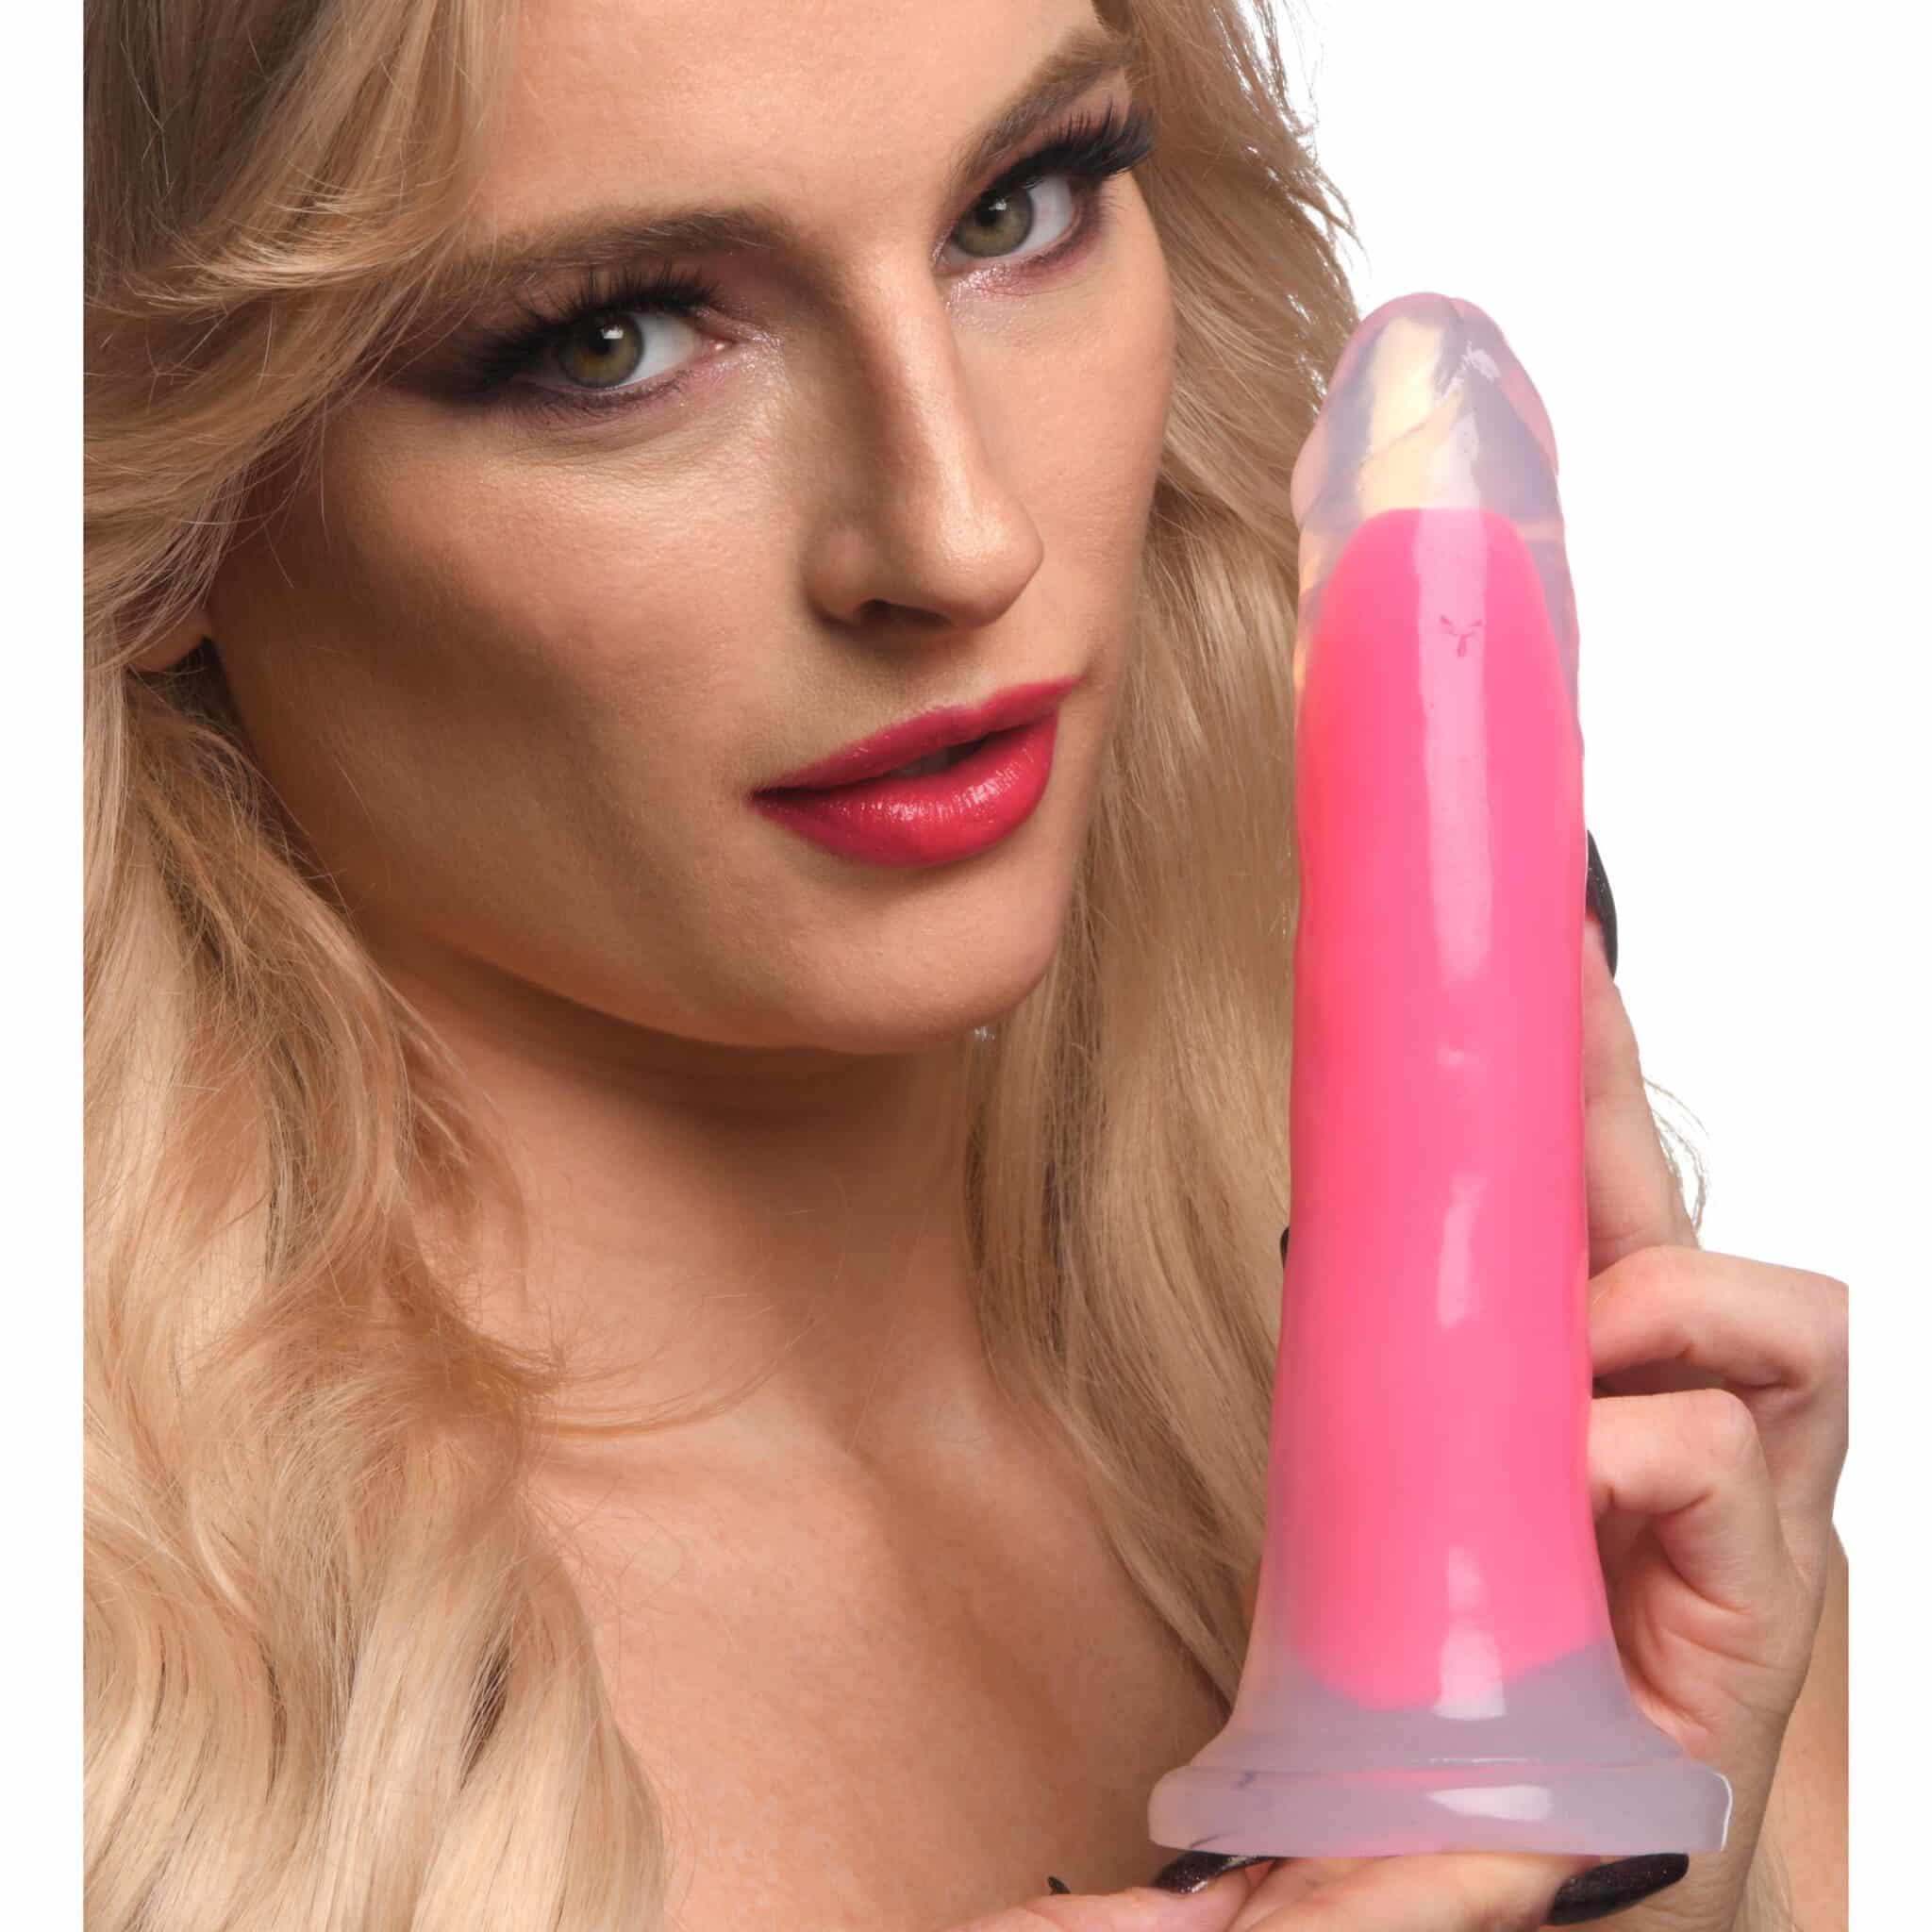 7 Inch Glow-in-the-Dark Silicone Dildo – Pink